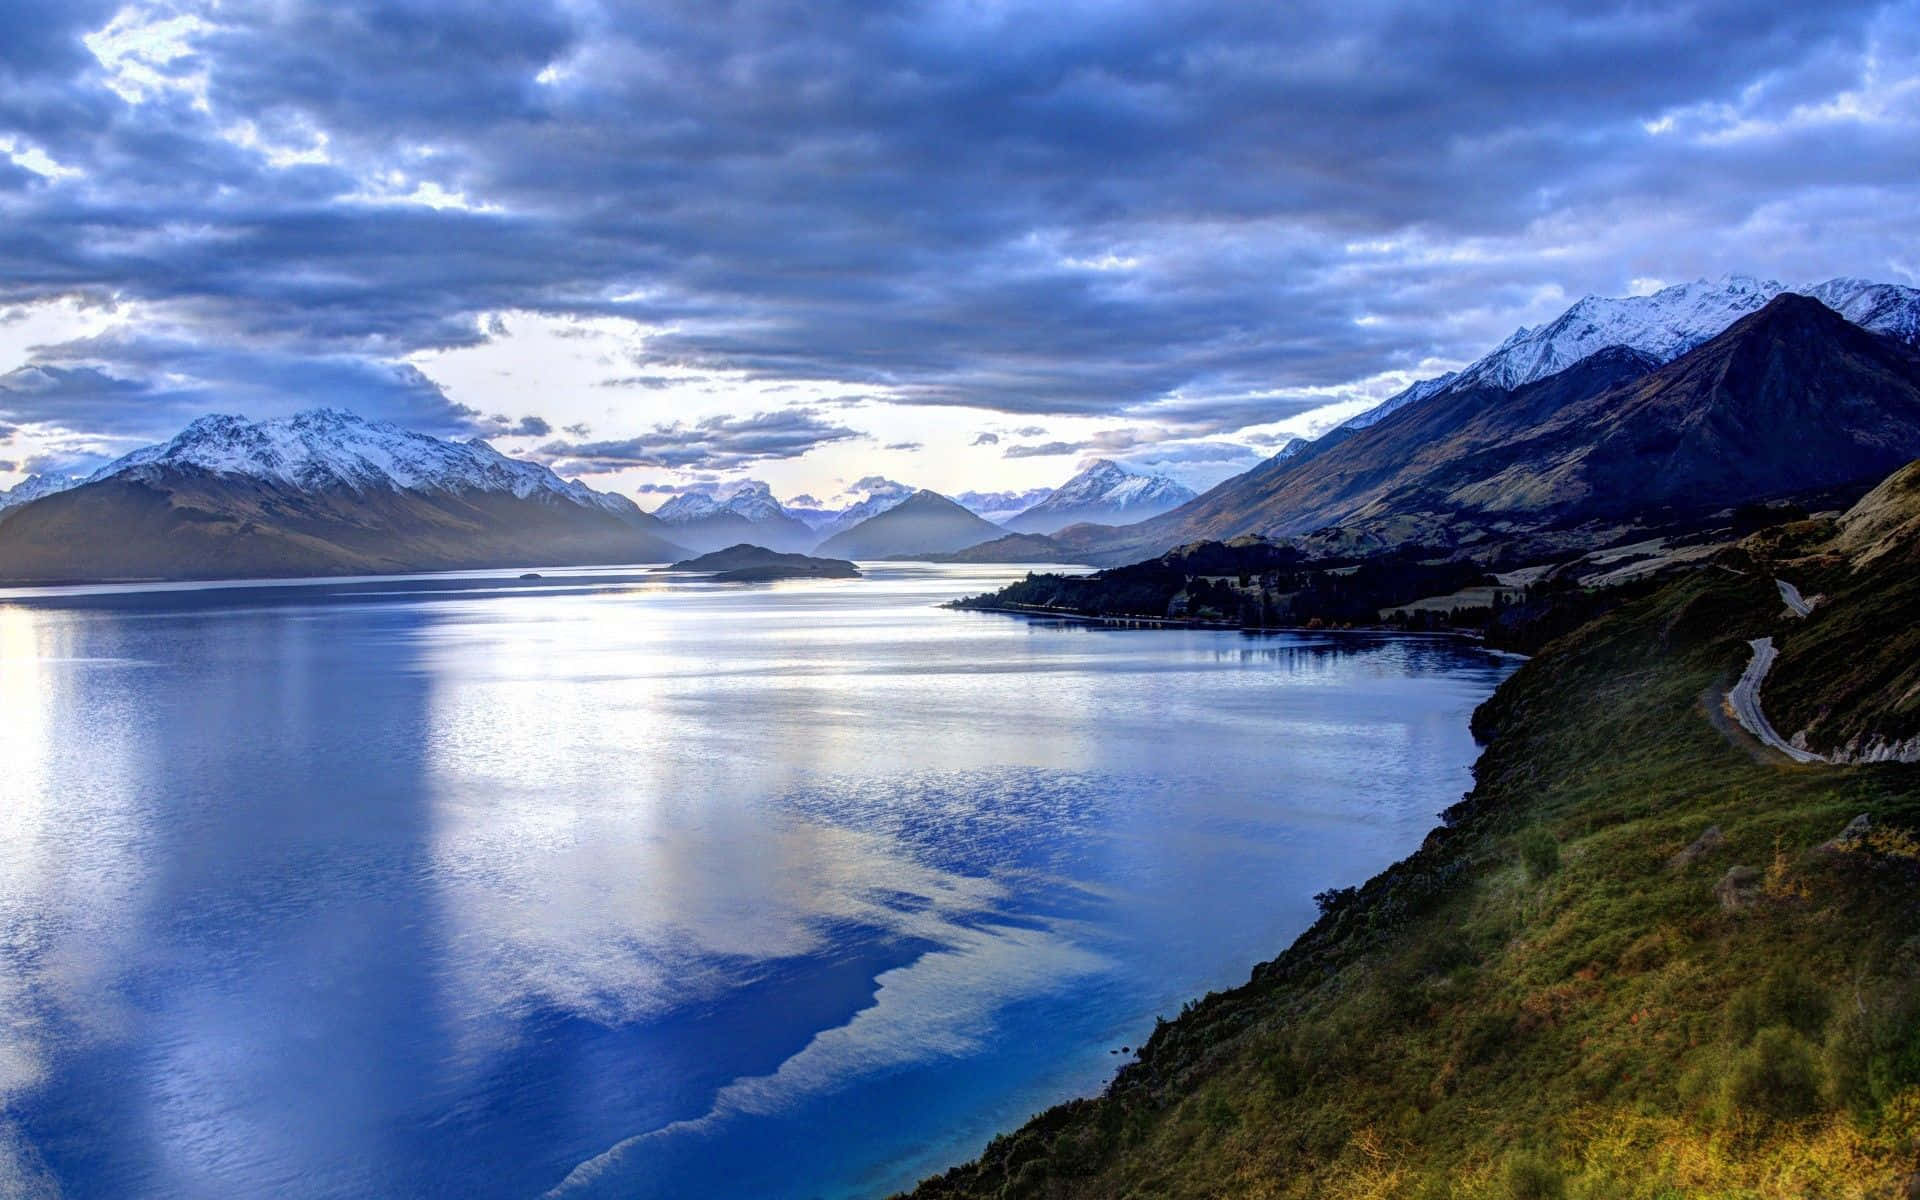 Enjoy the picturesque views of New Zealand